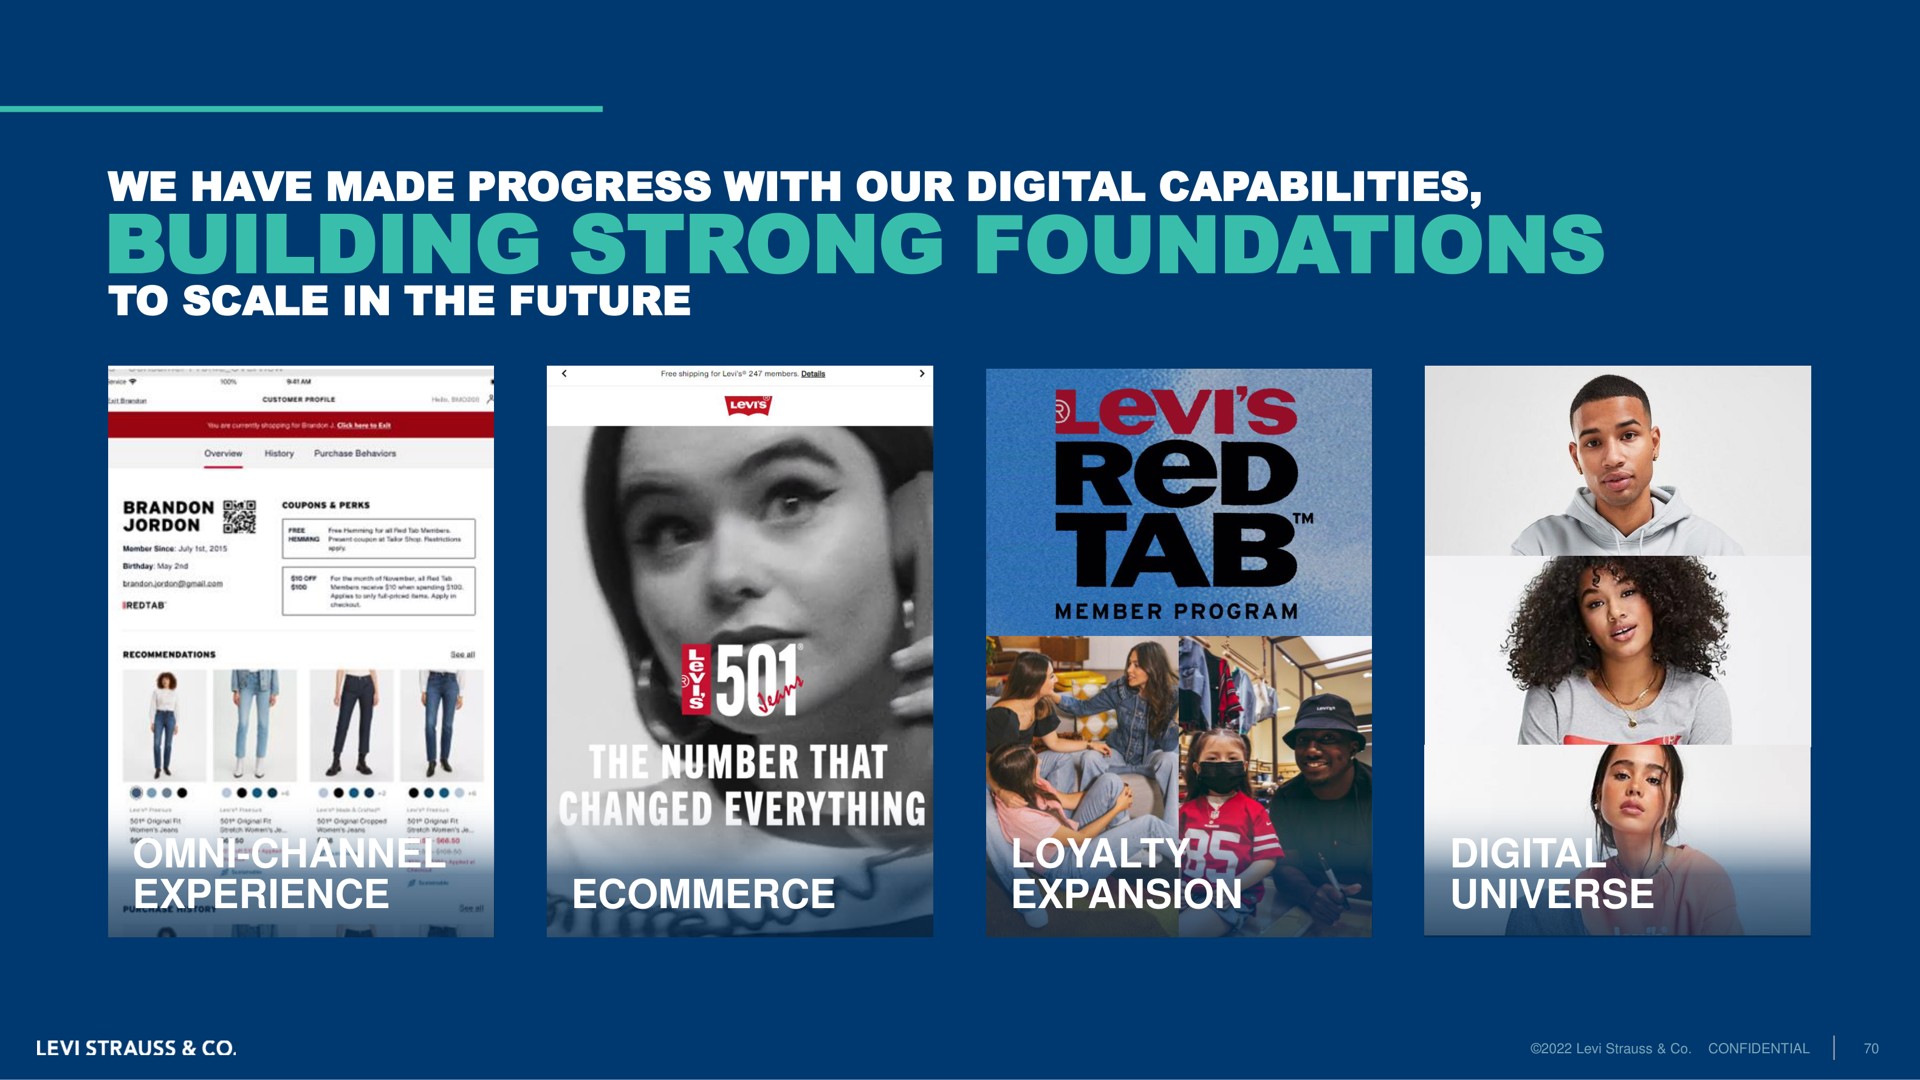 we have made progress with our digital capabilities building strong foundations to scale in the future channel experience loyalty expansion digital universe | Levi Strauss